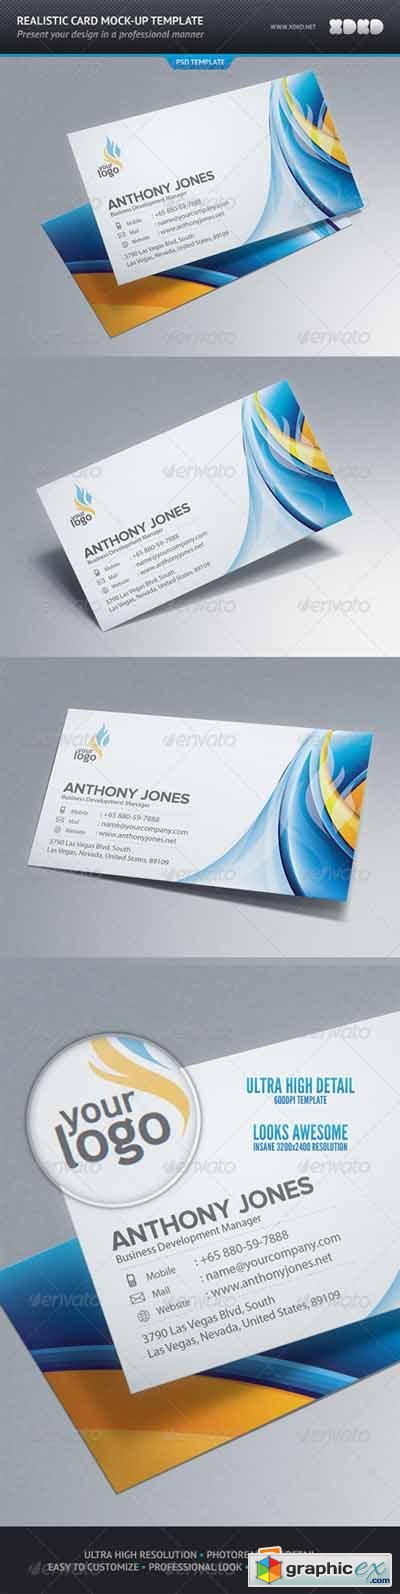 Photo-Realistic Business Card Mock-Up 549753